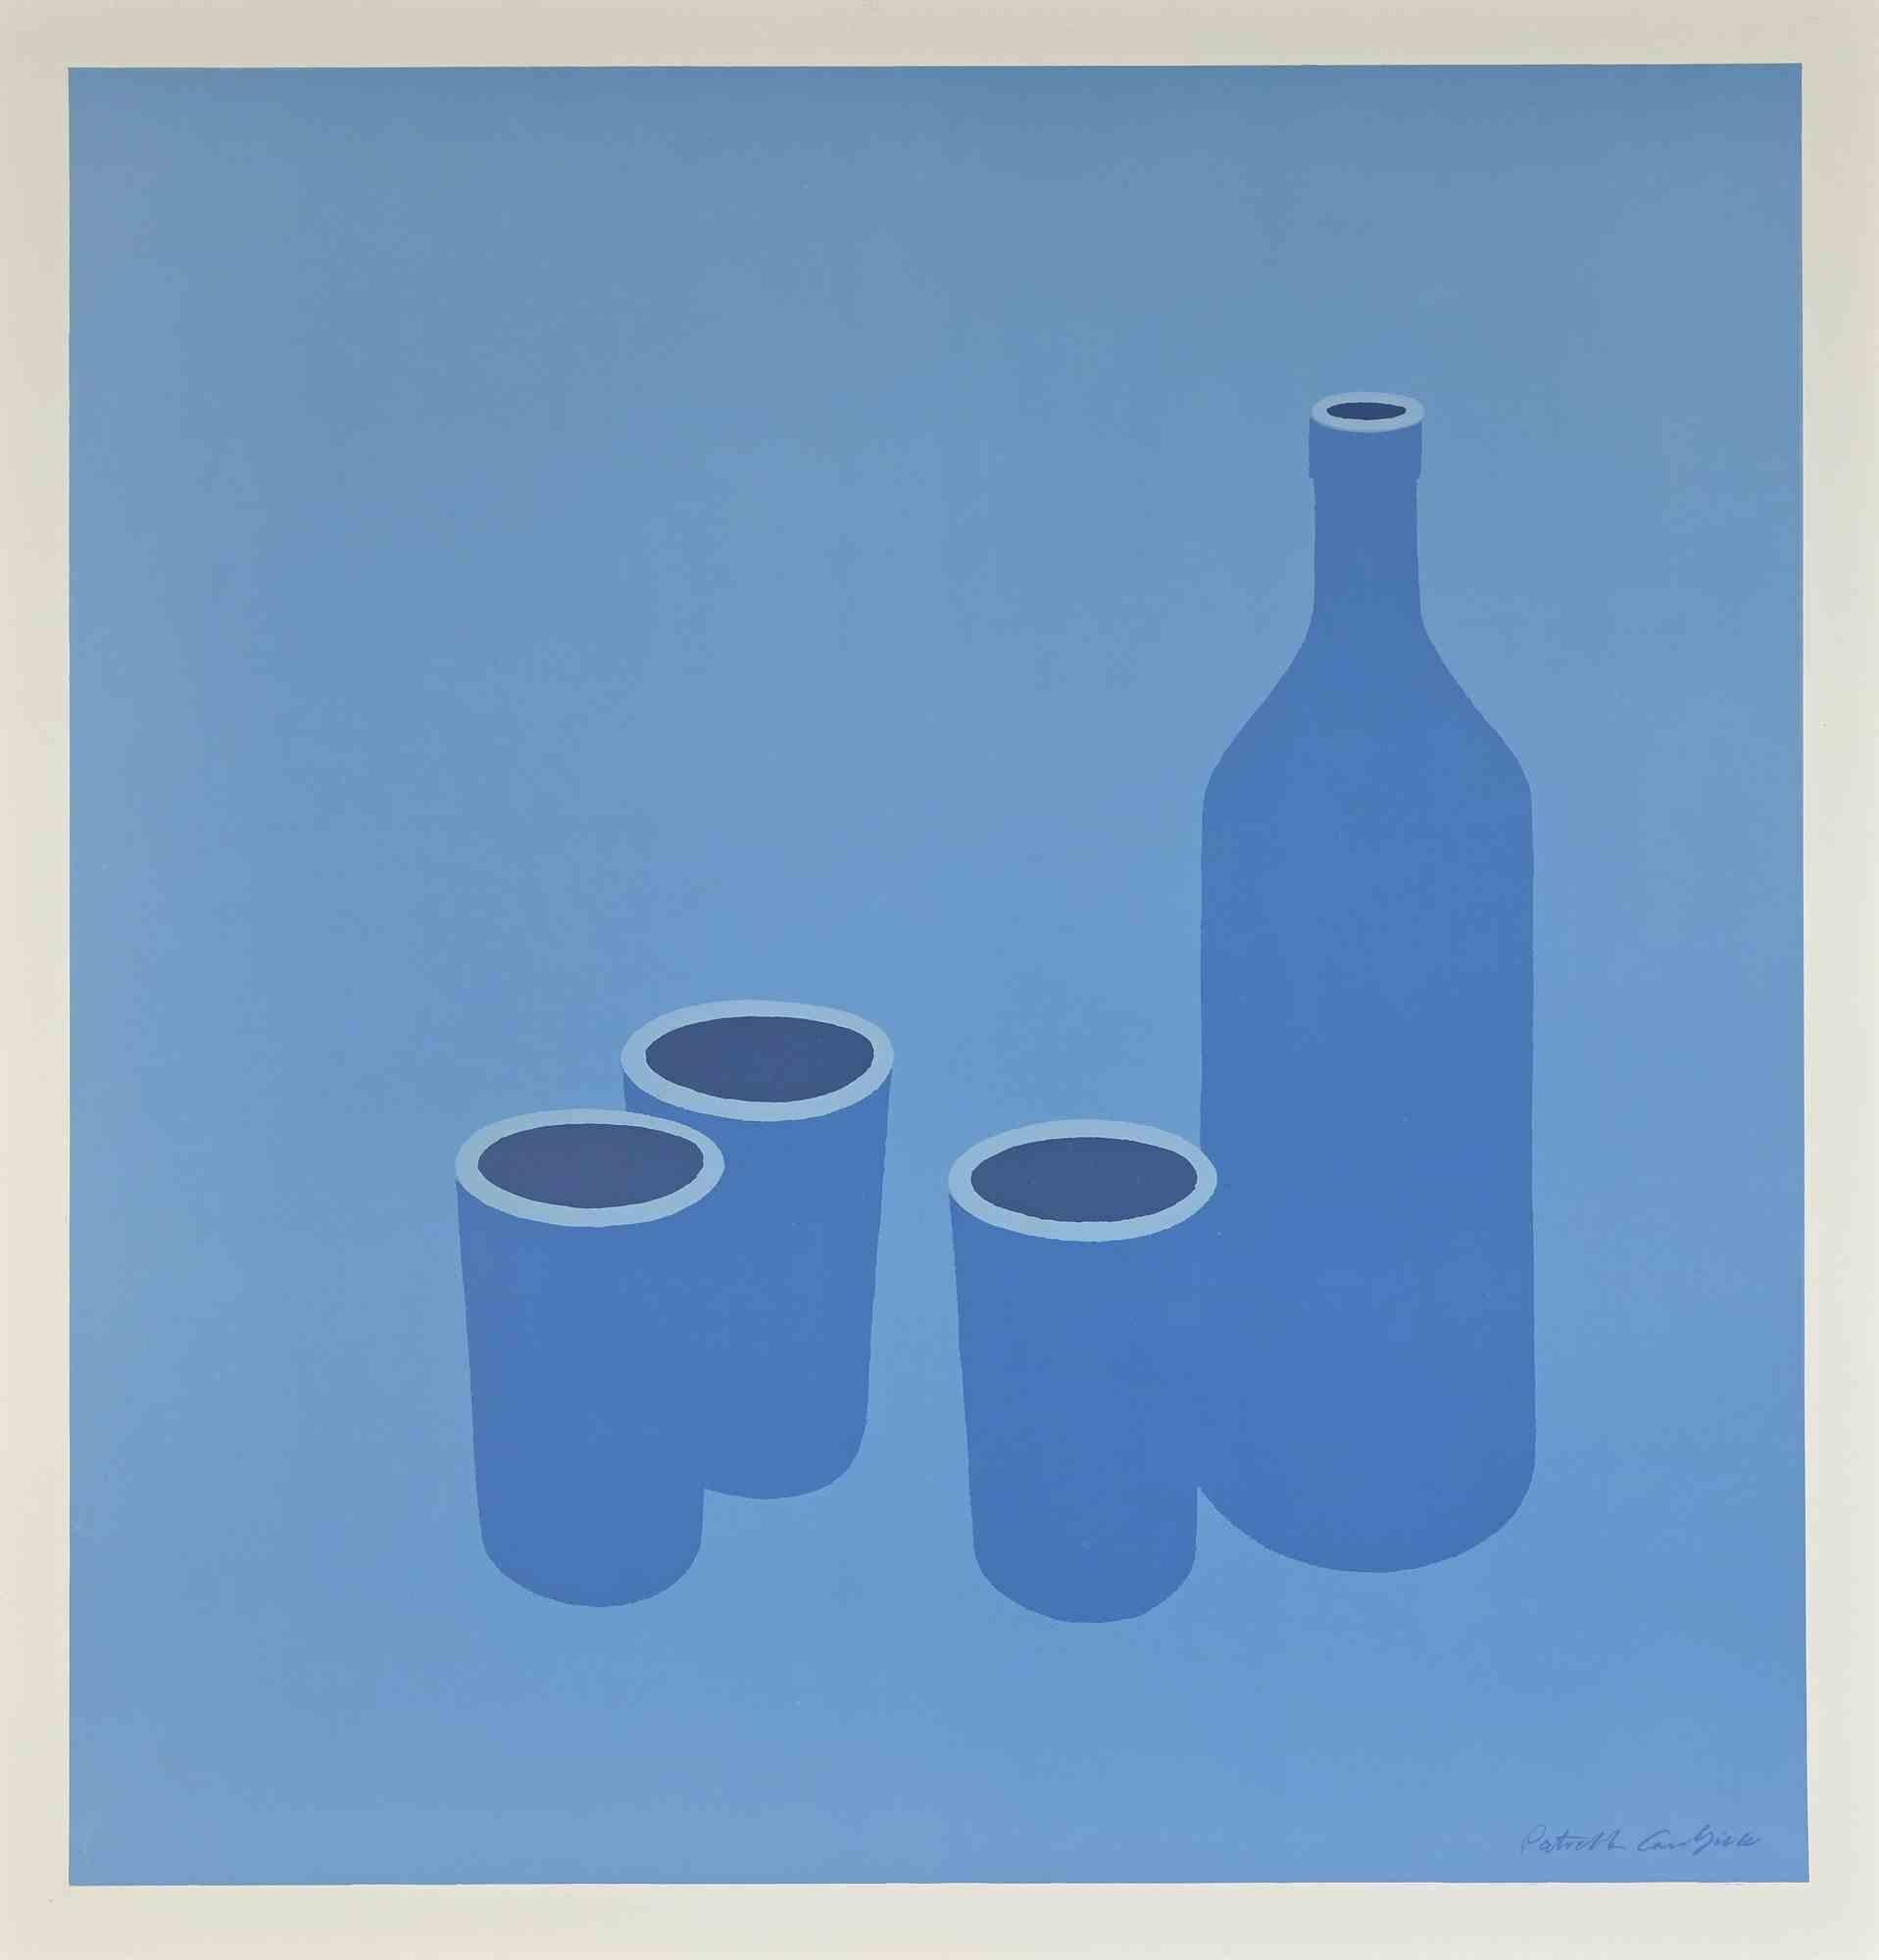 Still Life is a screenprint made by Patrick Caulfield in 1970s.

Hand-signed on the right corner. The artwork is depicted through harmonious colors in a well-balanced composition.

Good conditions.

Patrick Joseph Caulfield (Londra, 1936 – Londra,